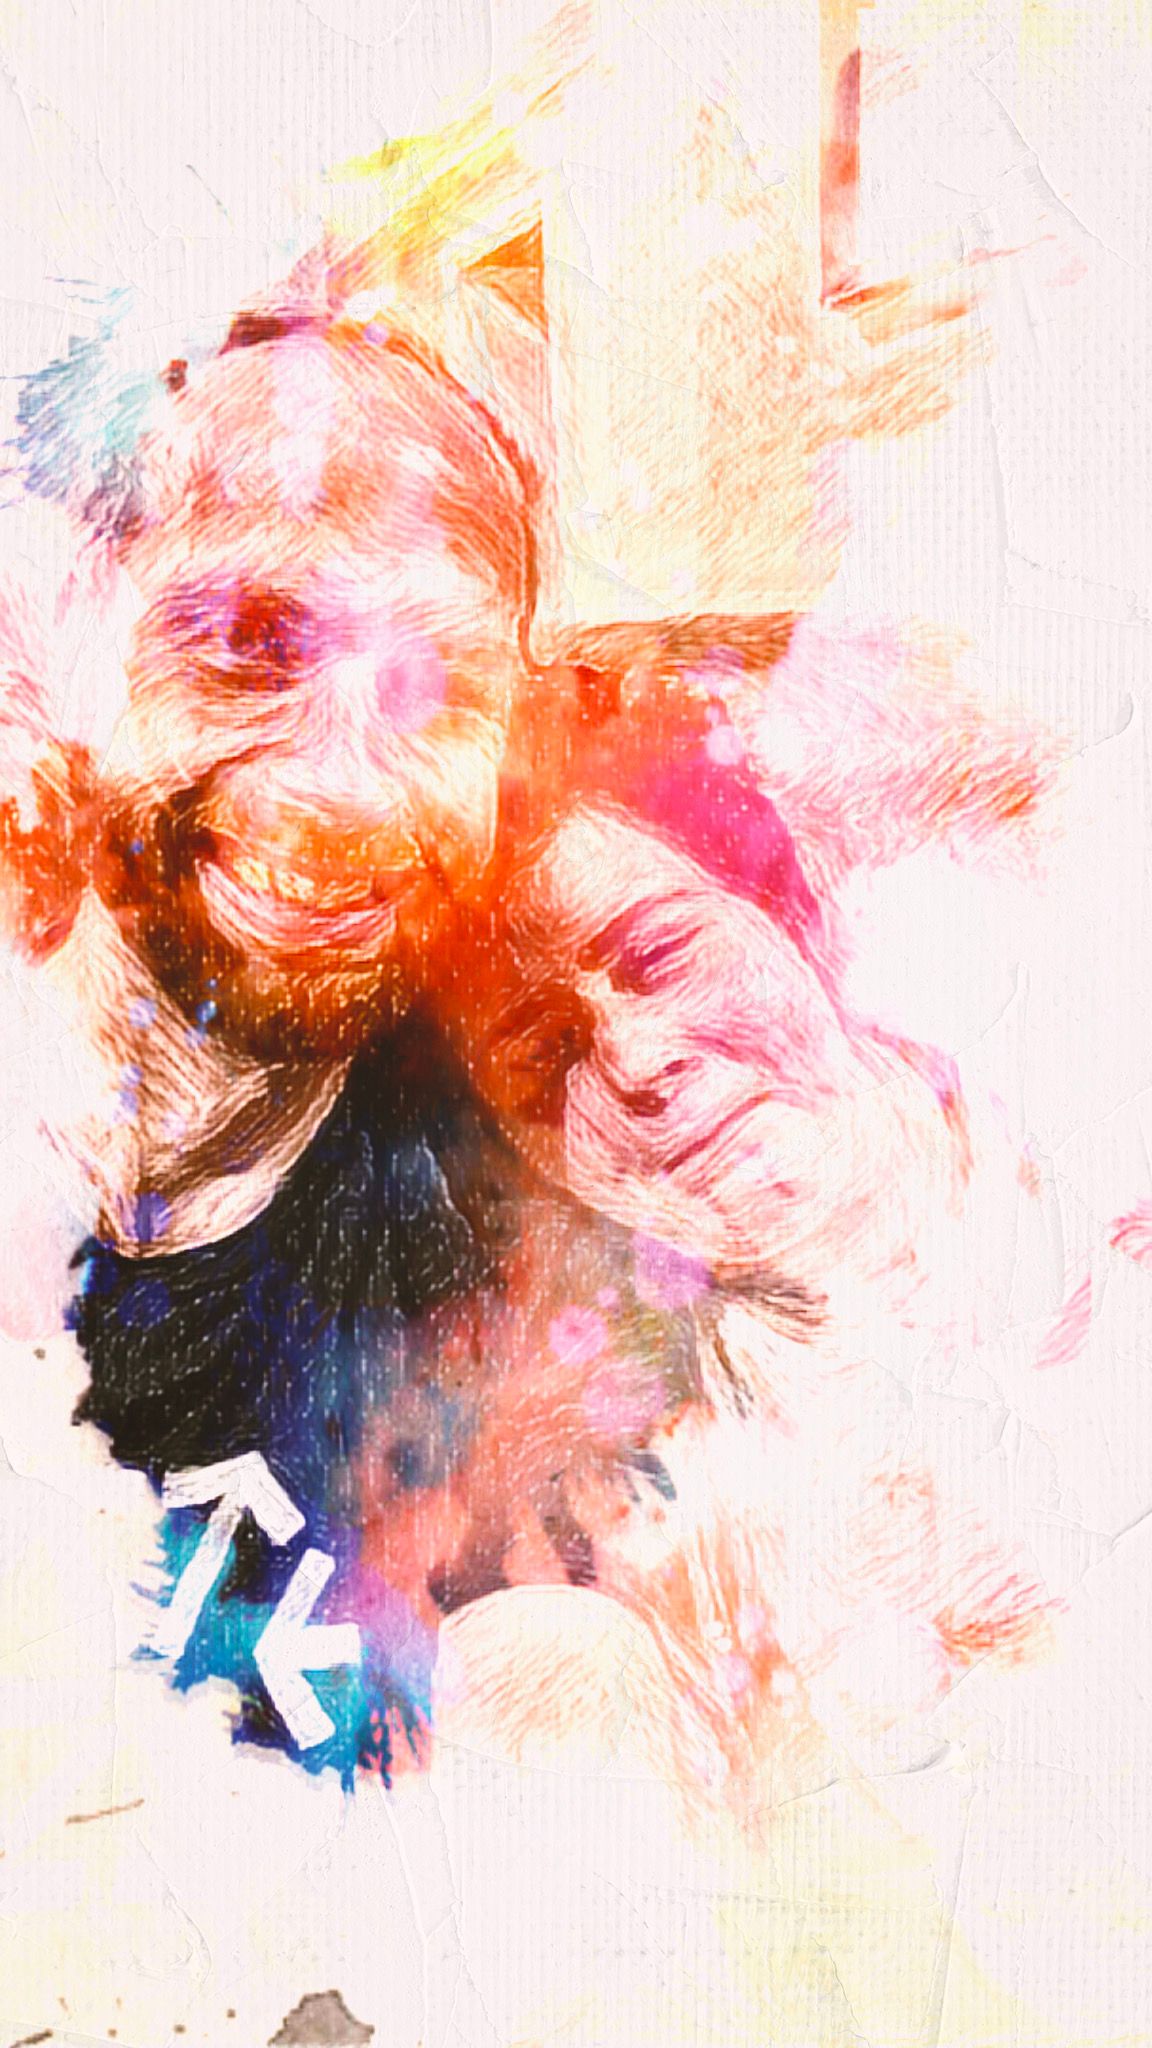 A very stylised photo of me, a white man with a beard, and Lily, a girl with short curly hair. It's very bright and the edges of the photo are white, with us rendered as if drawn with brightly-coloured pencils.